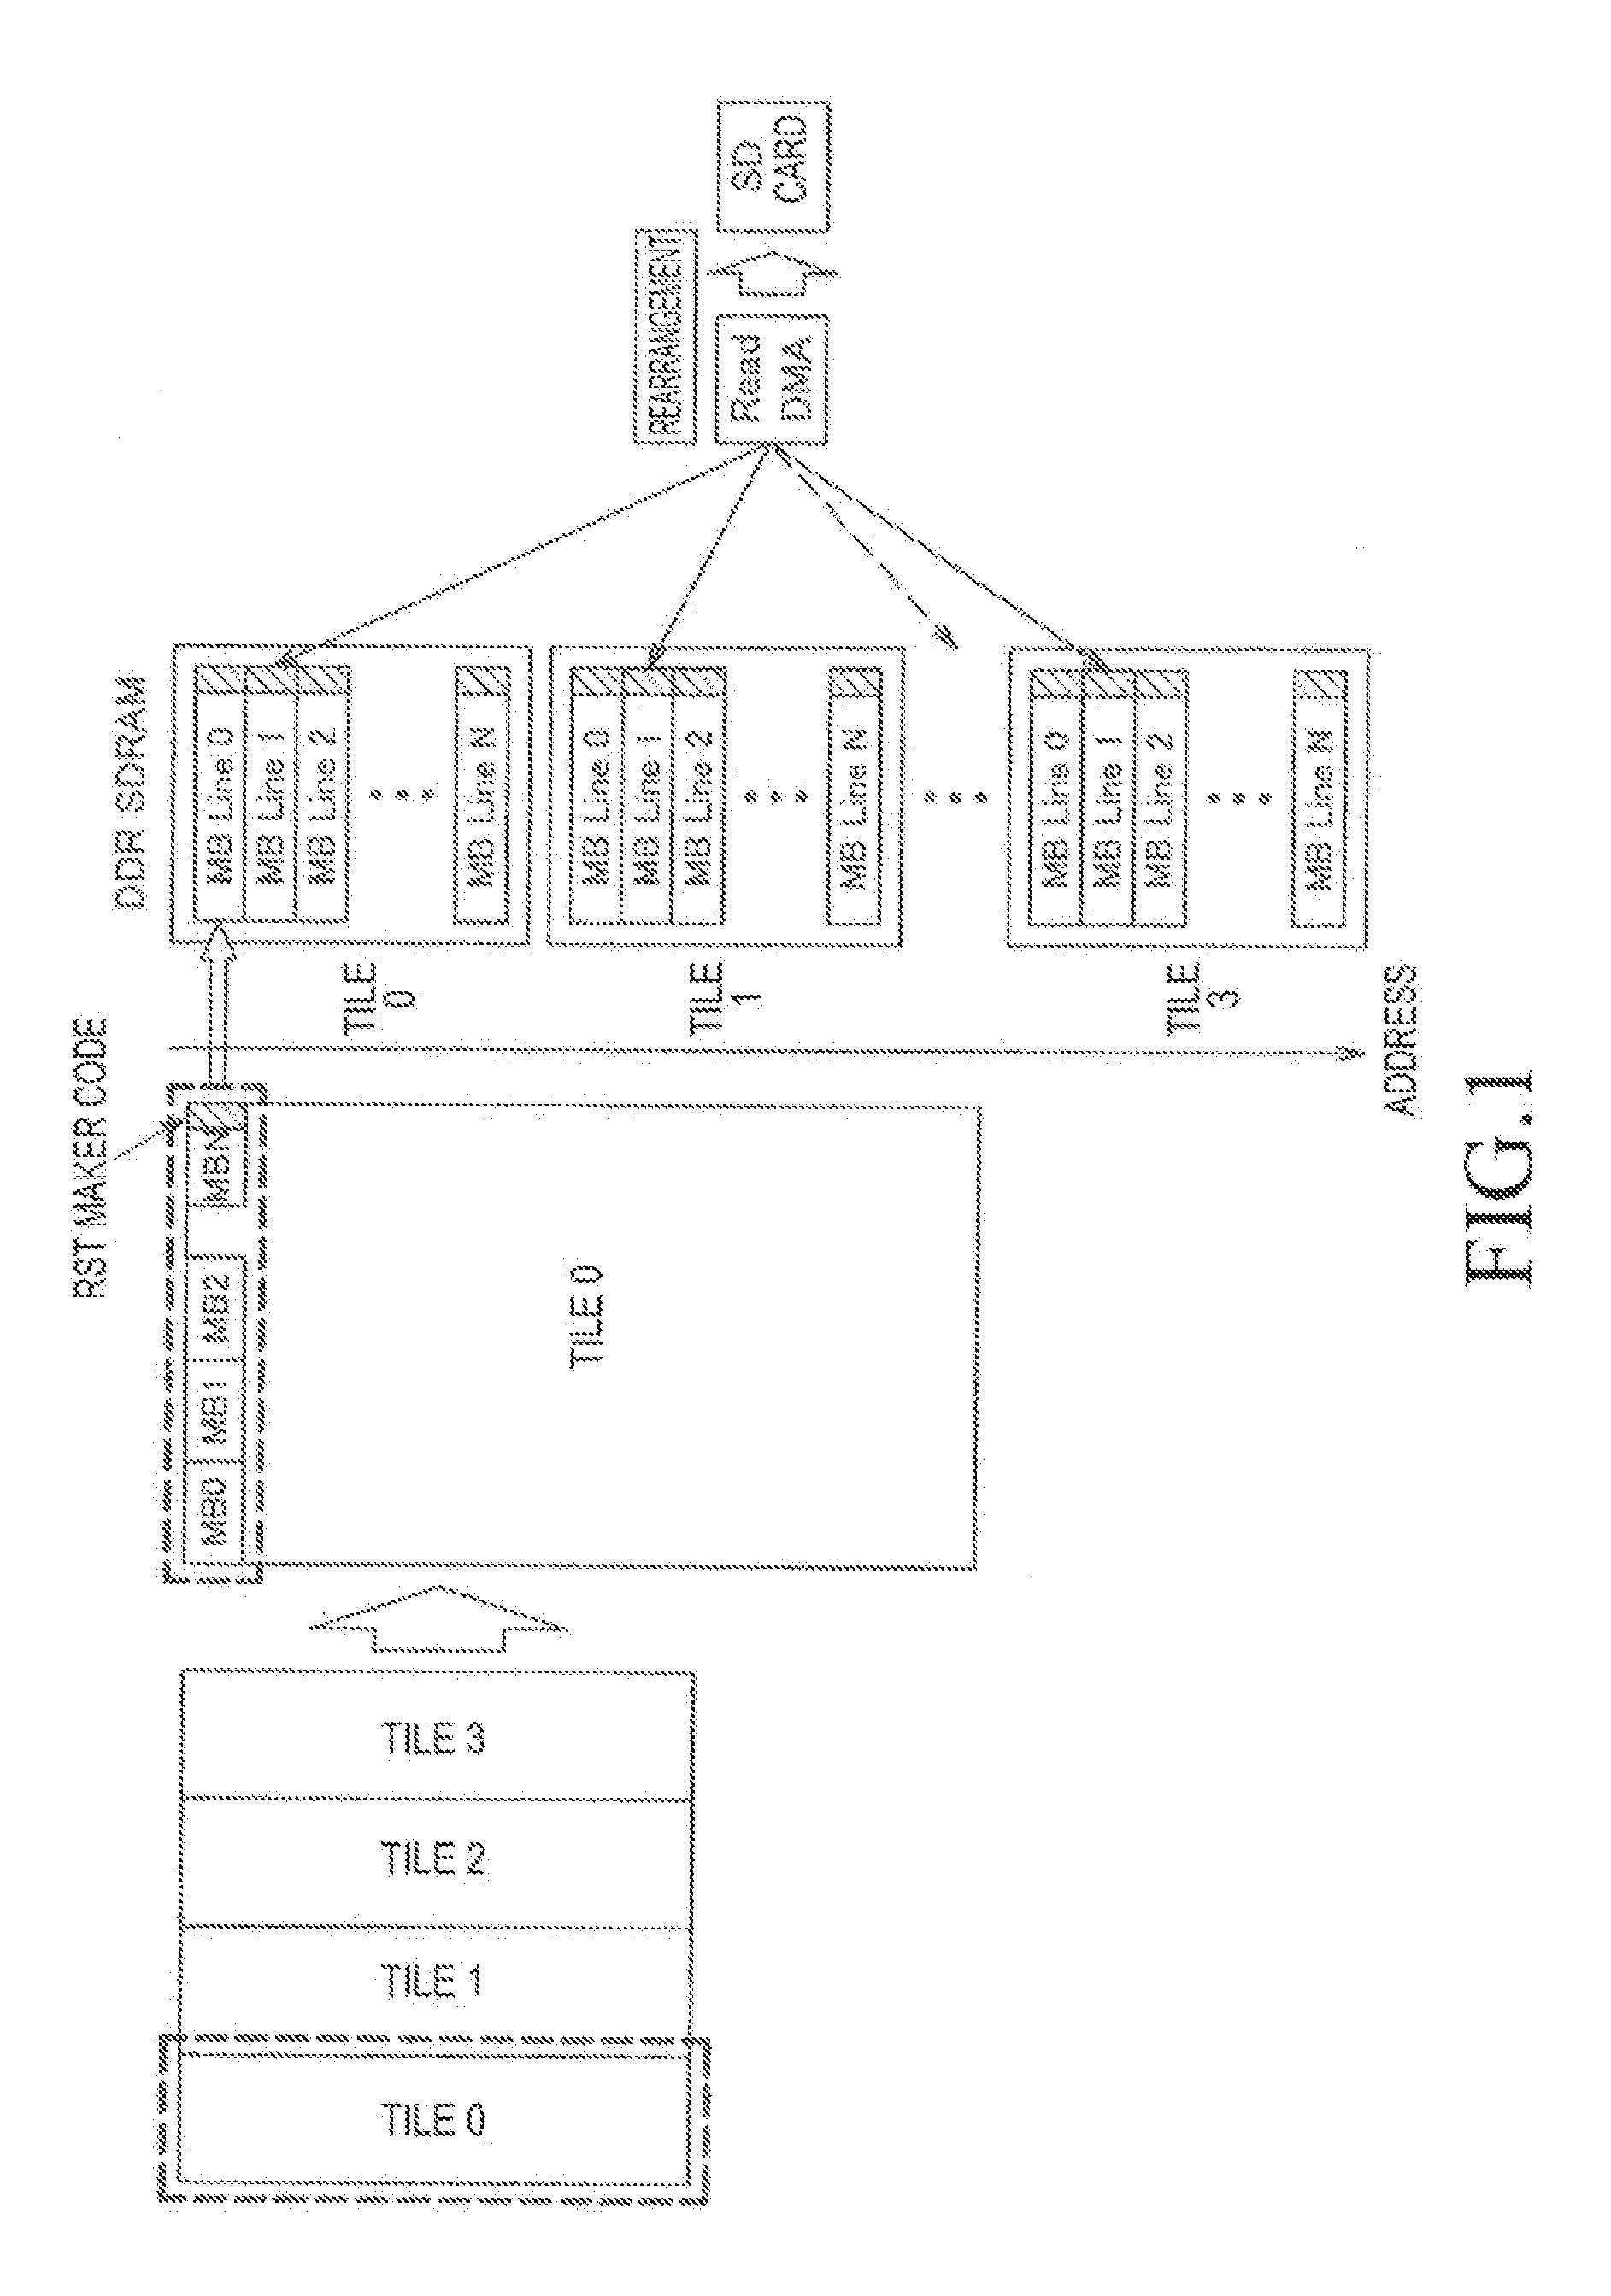 Imaging apparatus and image processing method